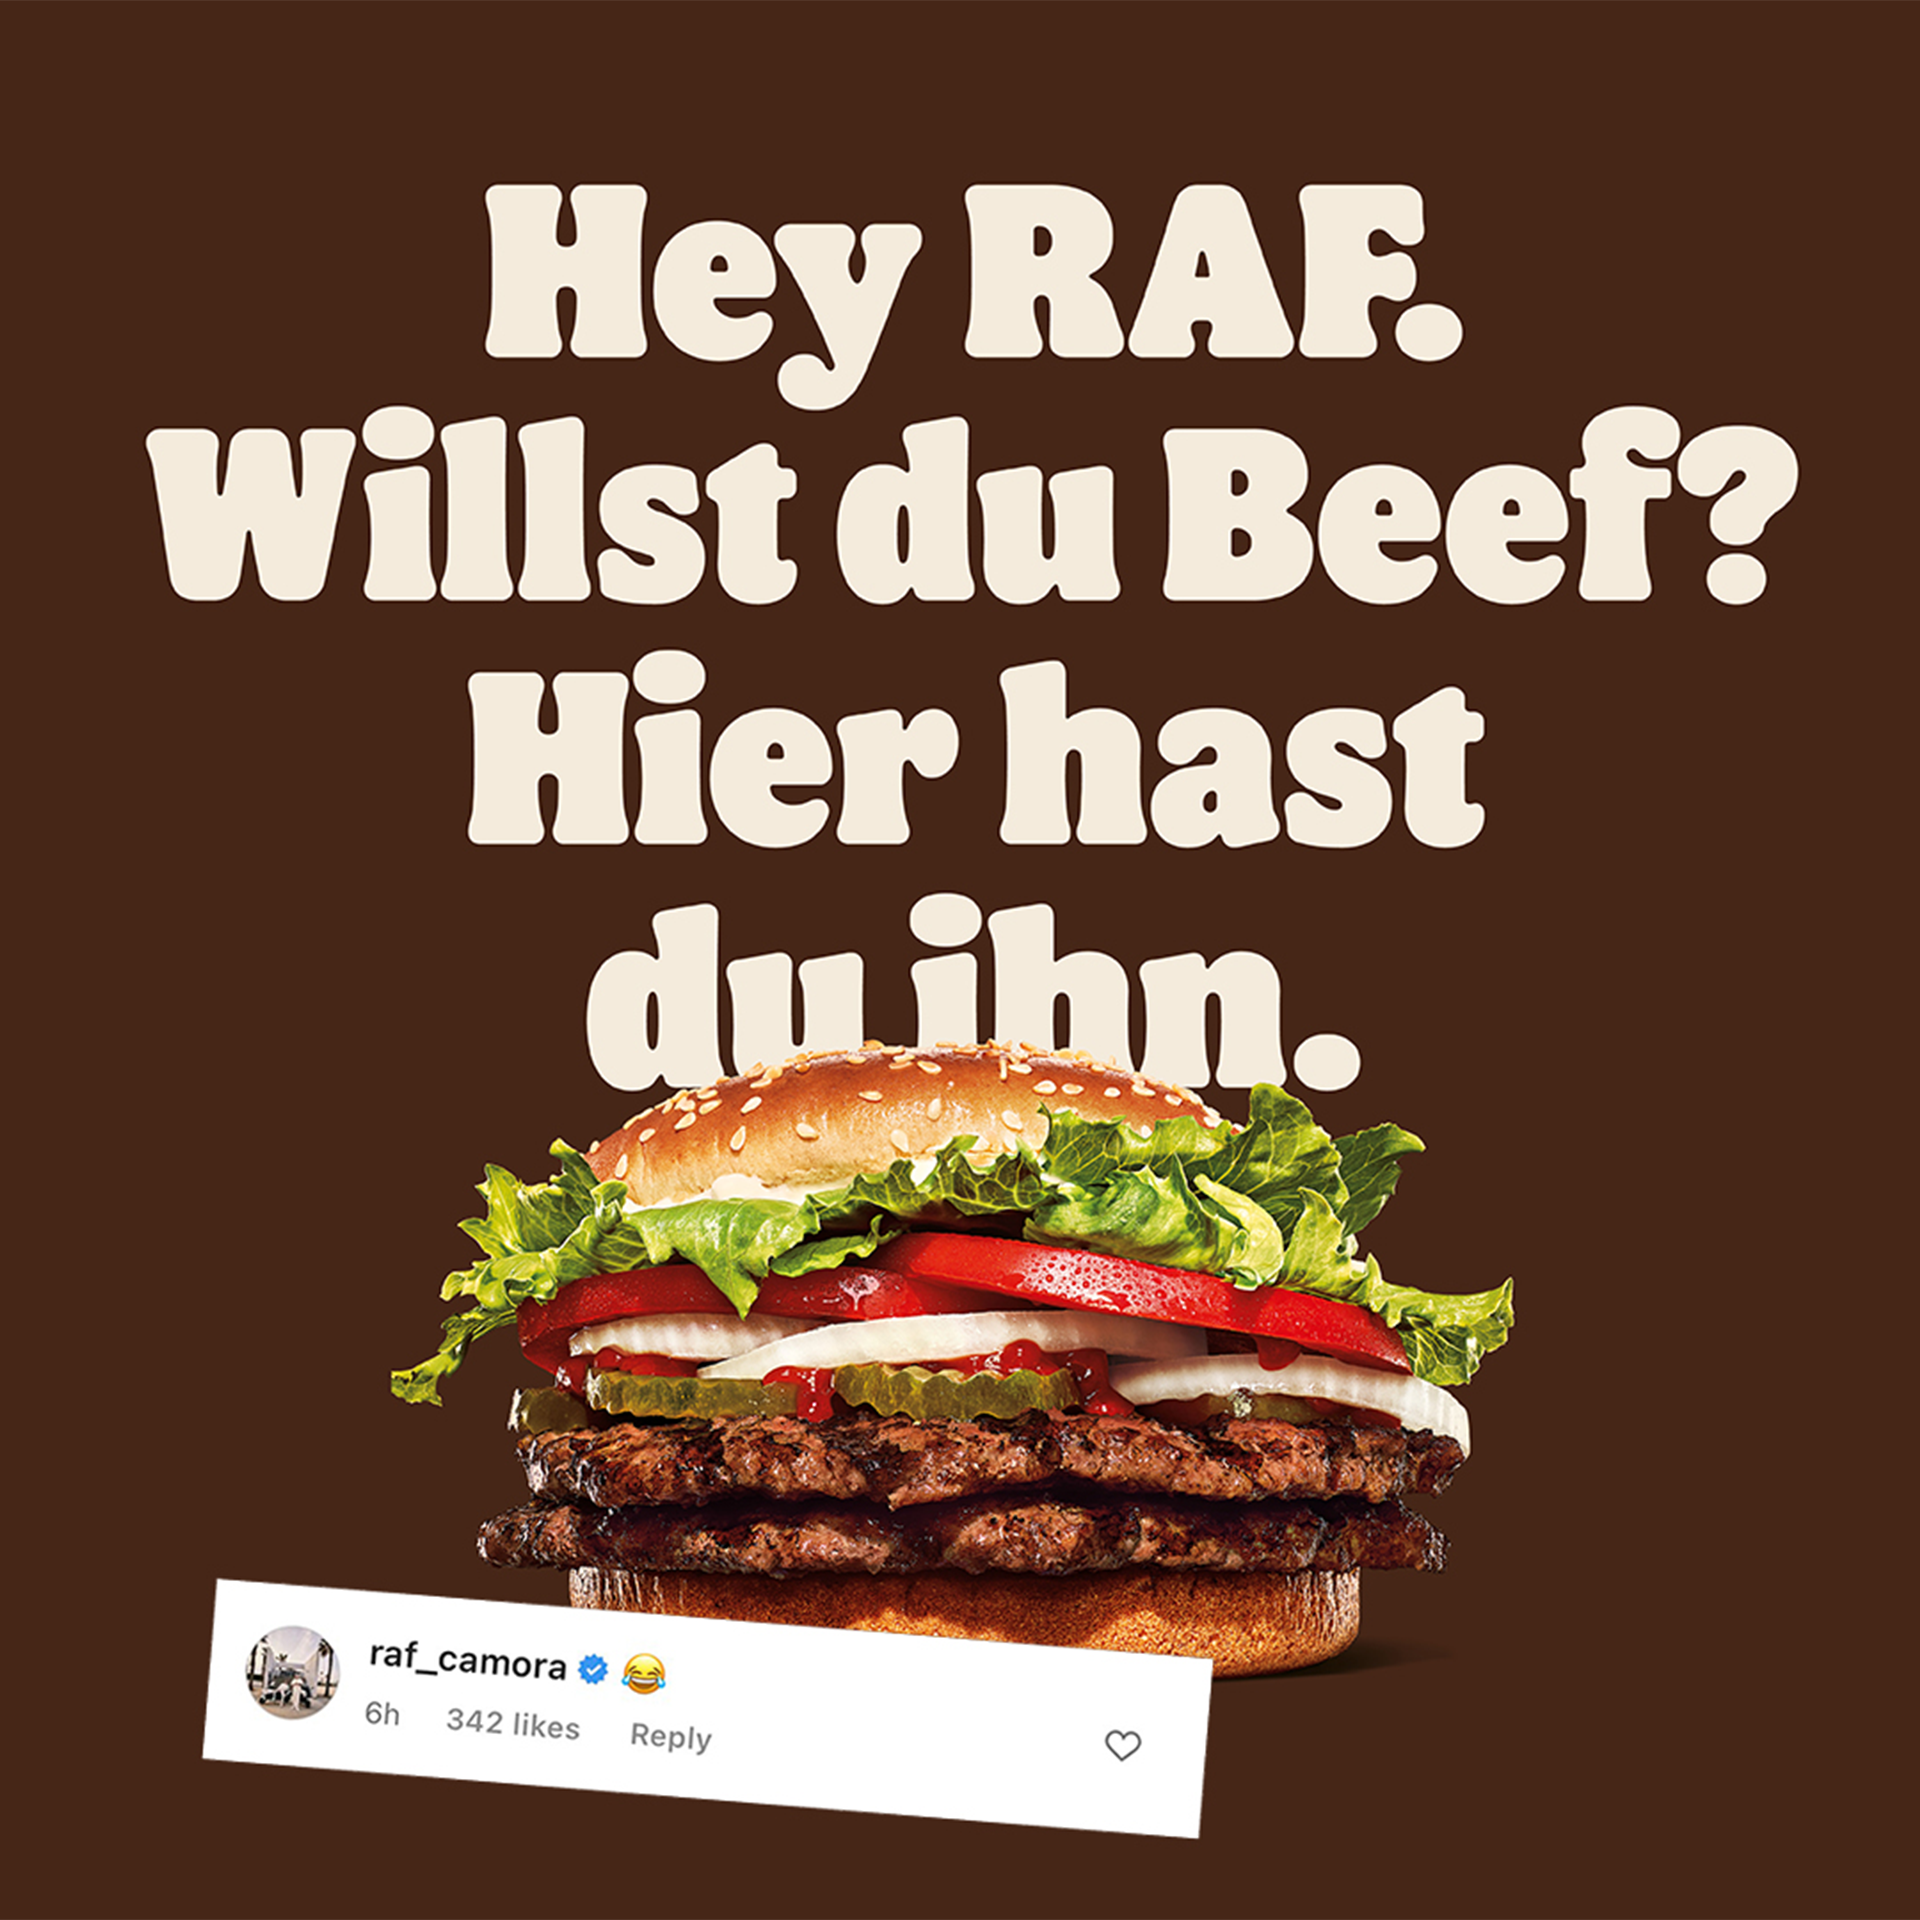 Image of a Burger King ad as a response to an Instagram post by raf_camora with the tagline: "Hey RAF. Want beef? Here you go."